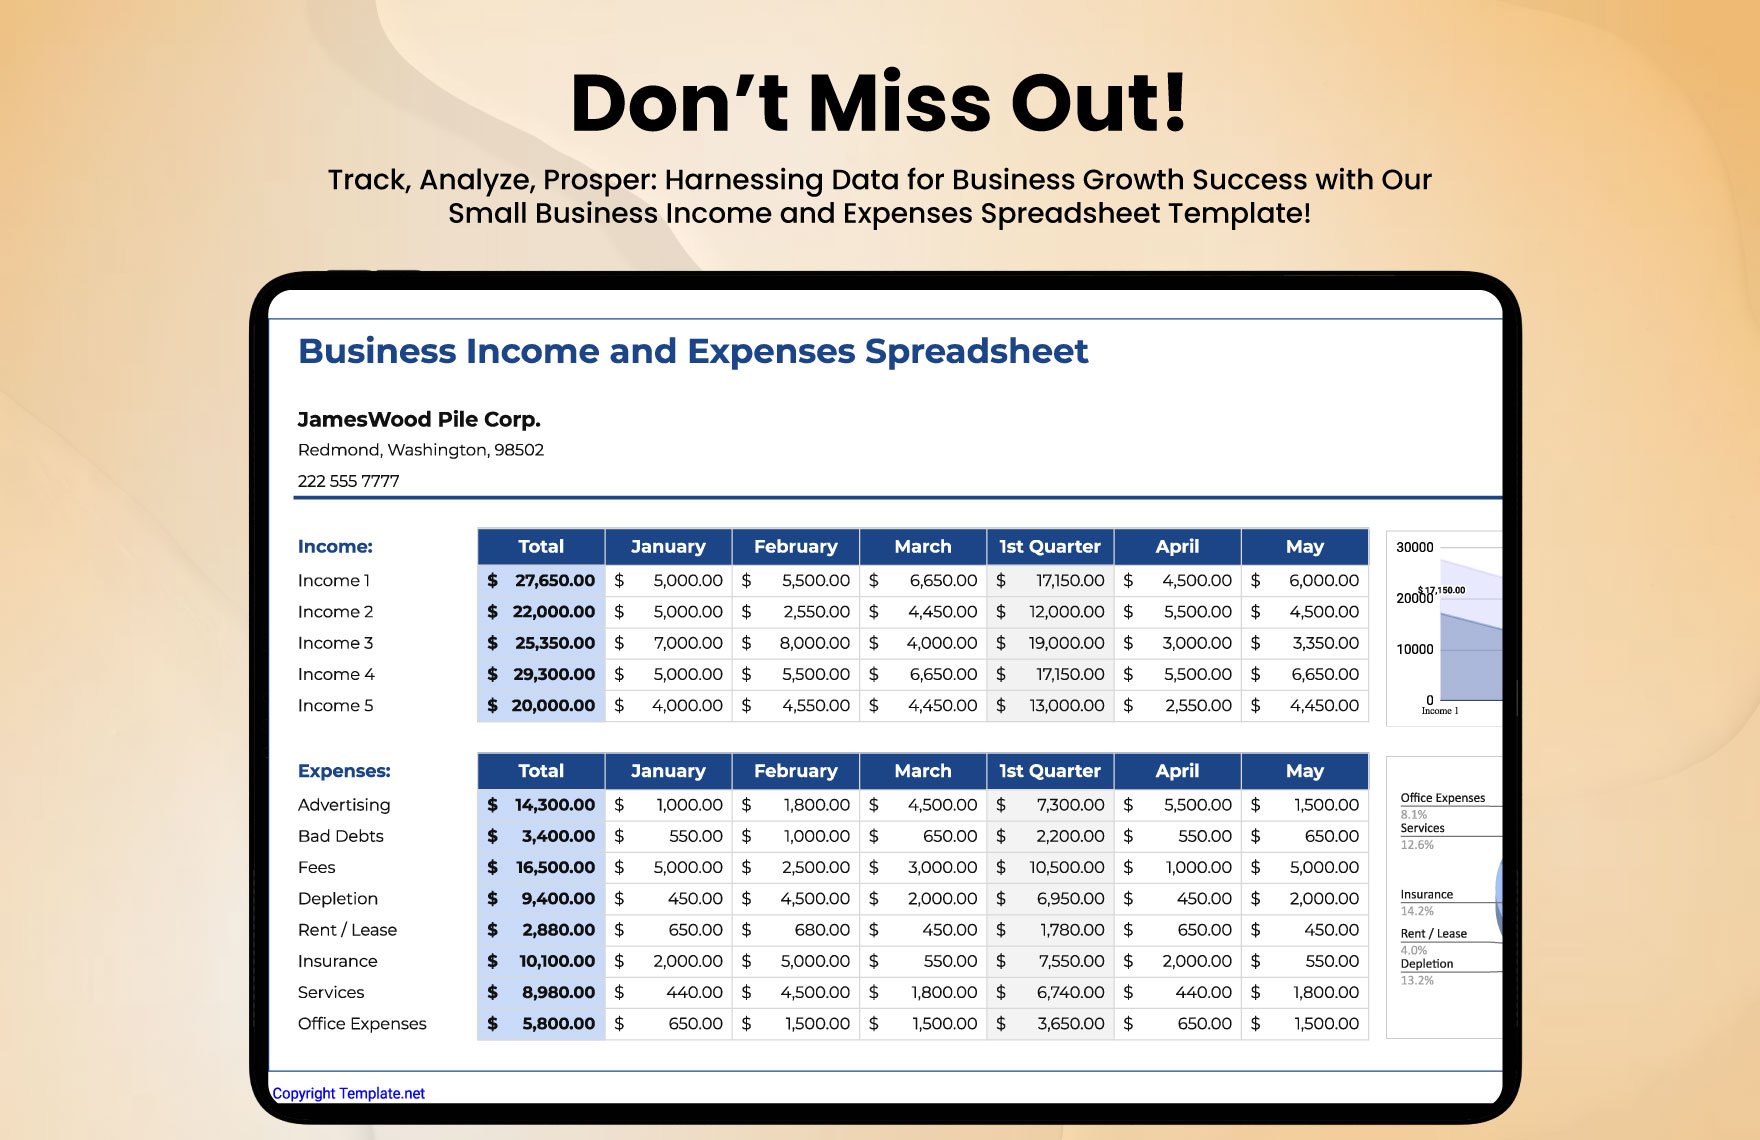 Small Business Income and Expenses Spreadsheet Template